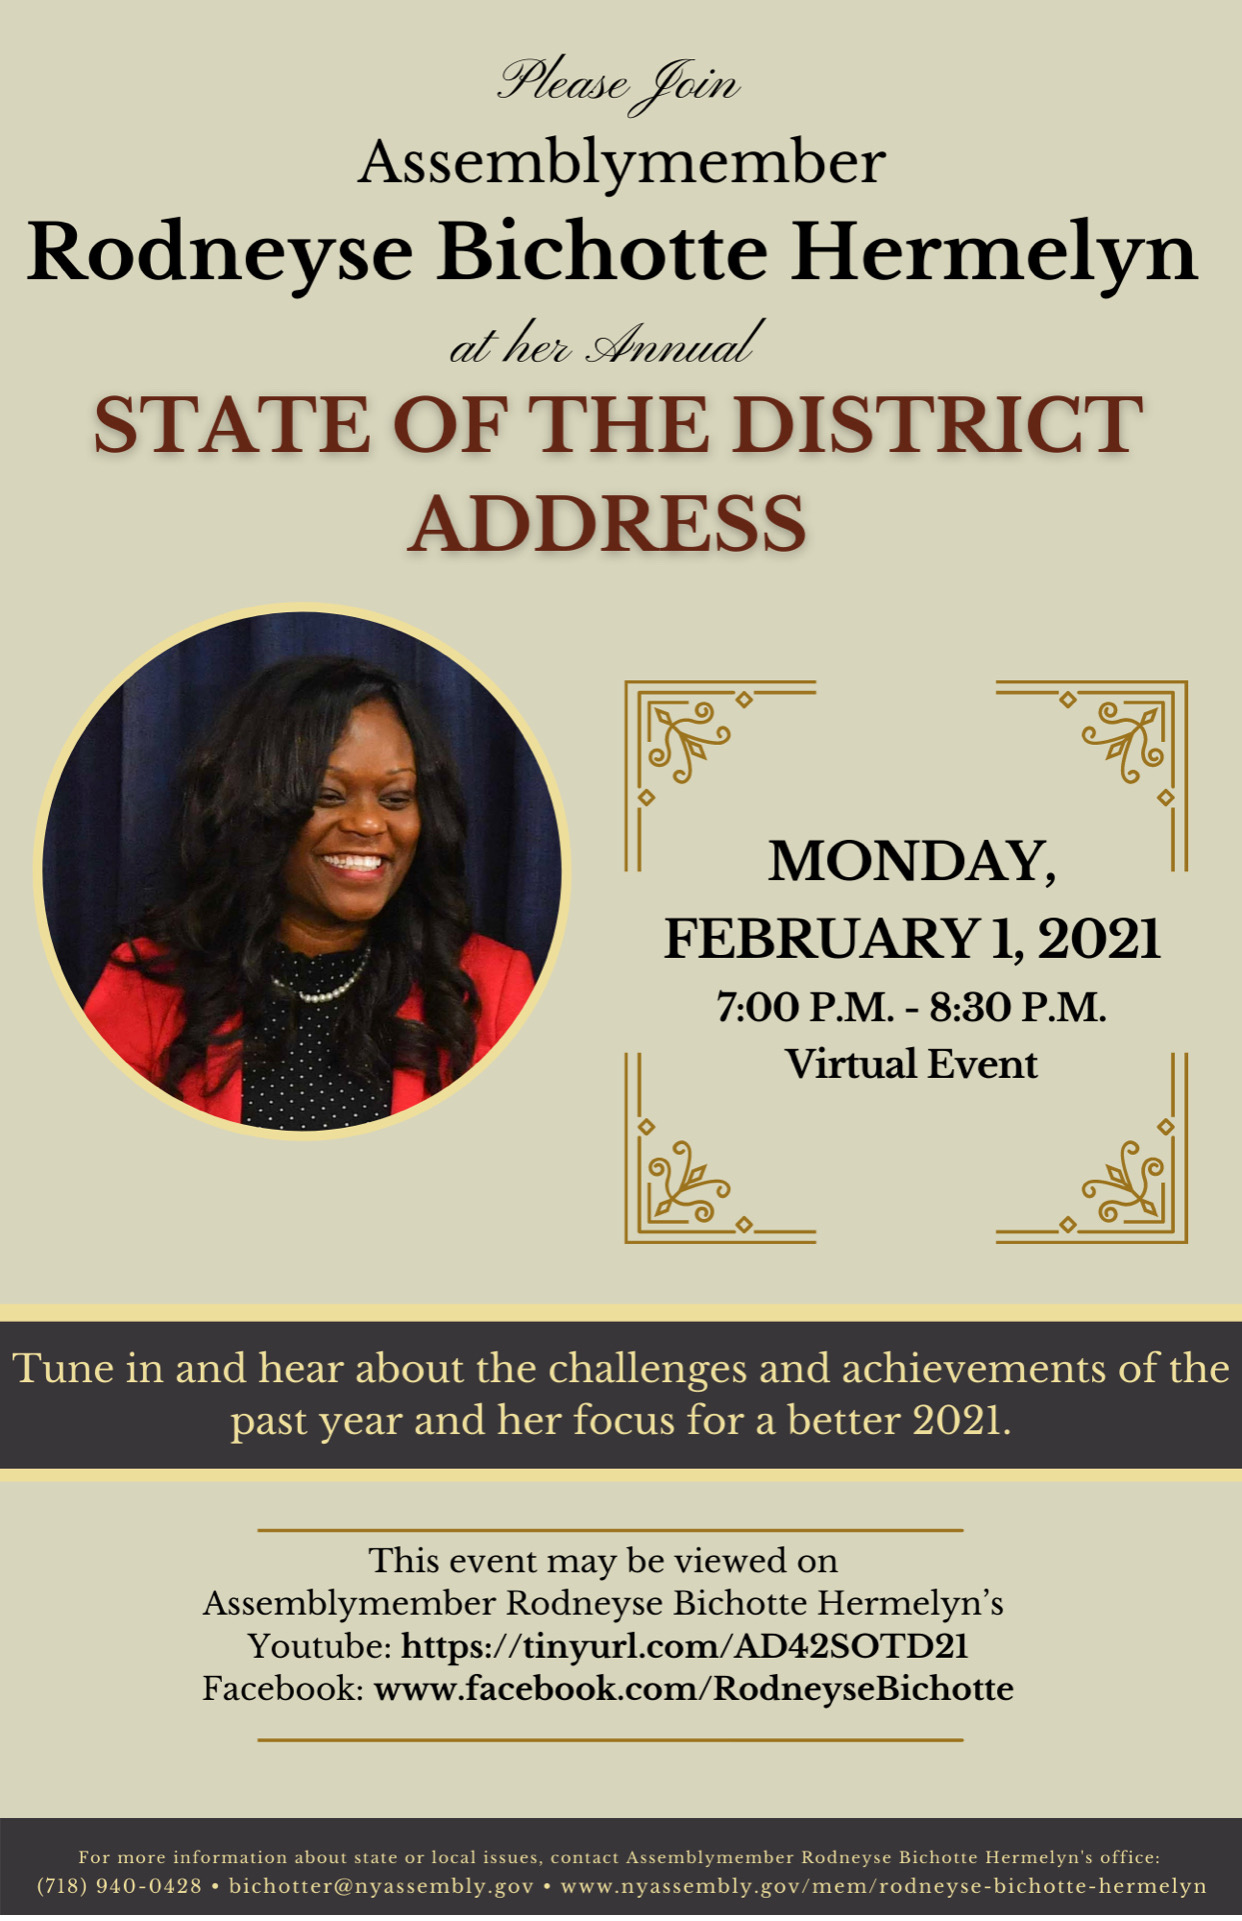 State of the District 2021